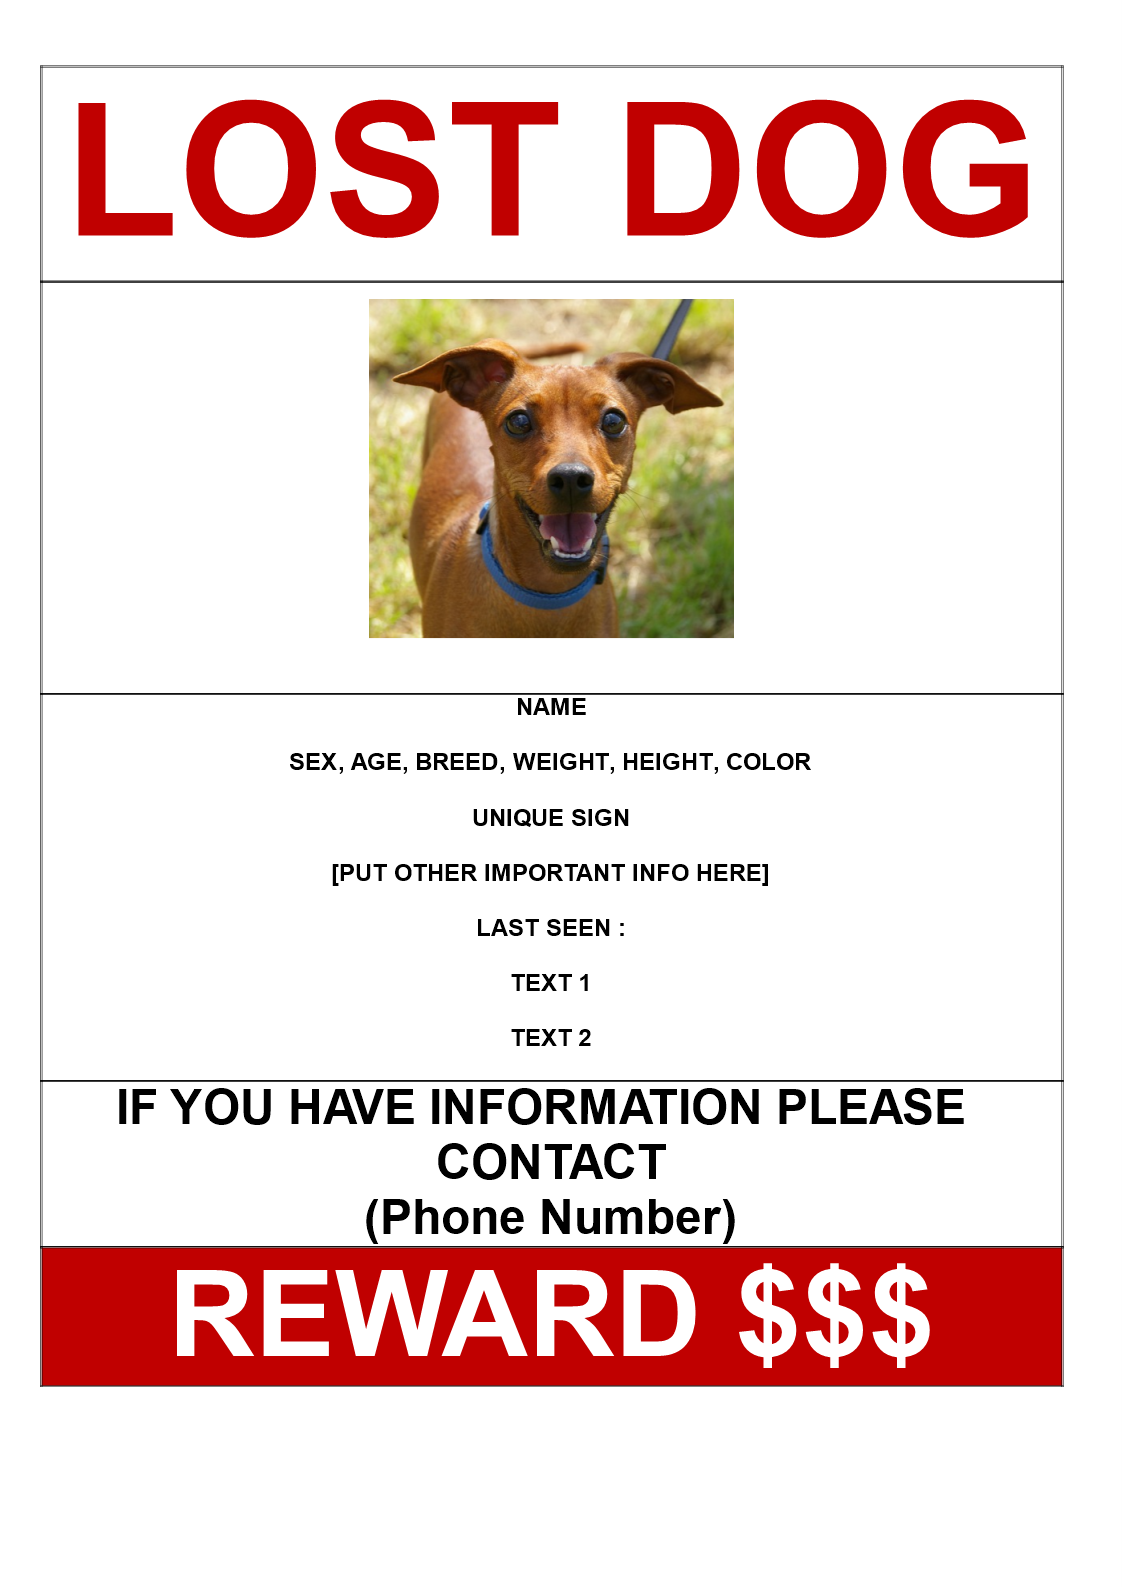 Missing Dog Poster with reward A3 size main image